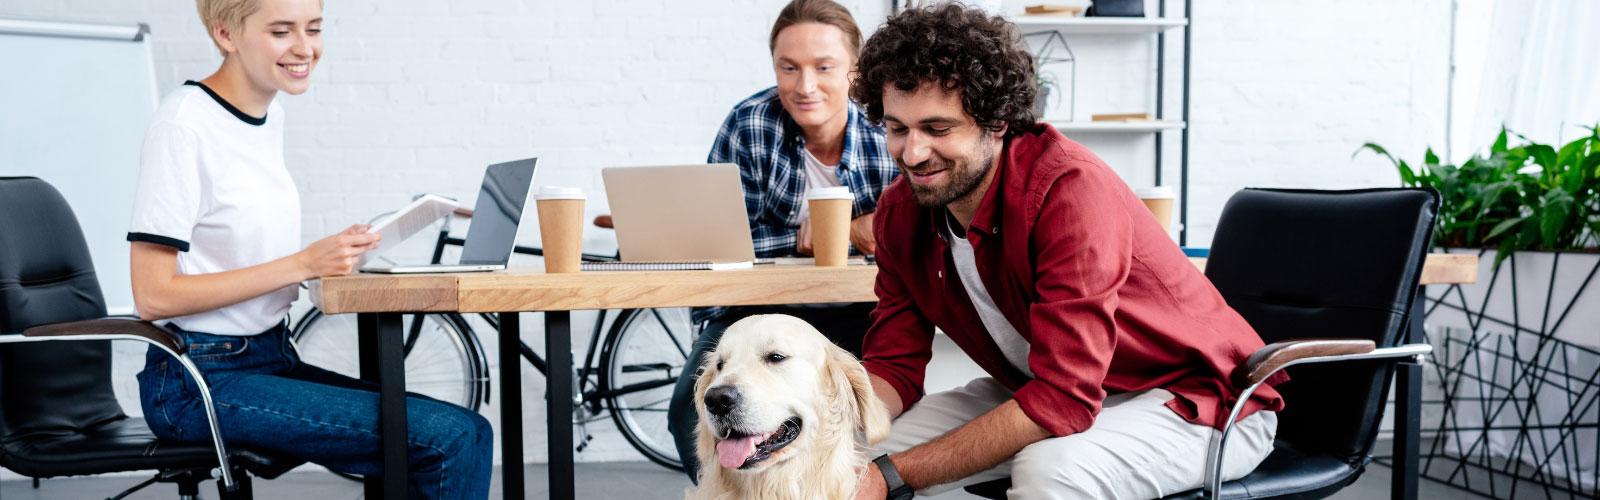 Young professionals in pet-friendly office